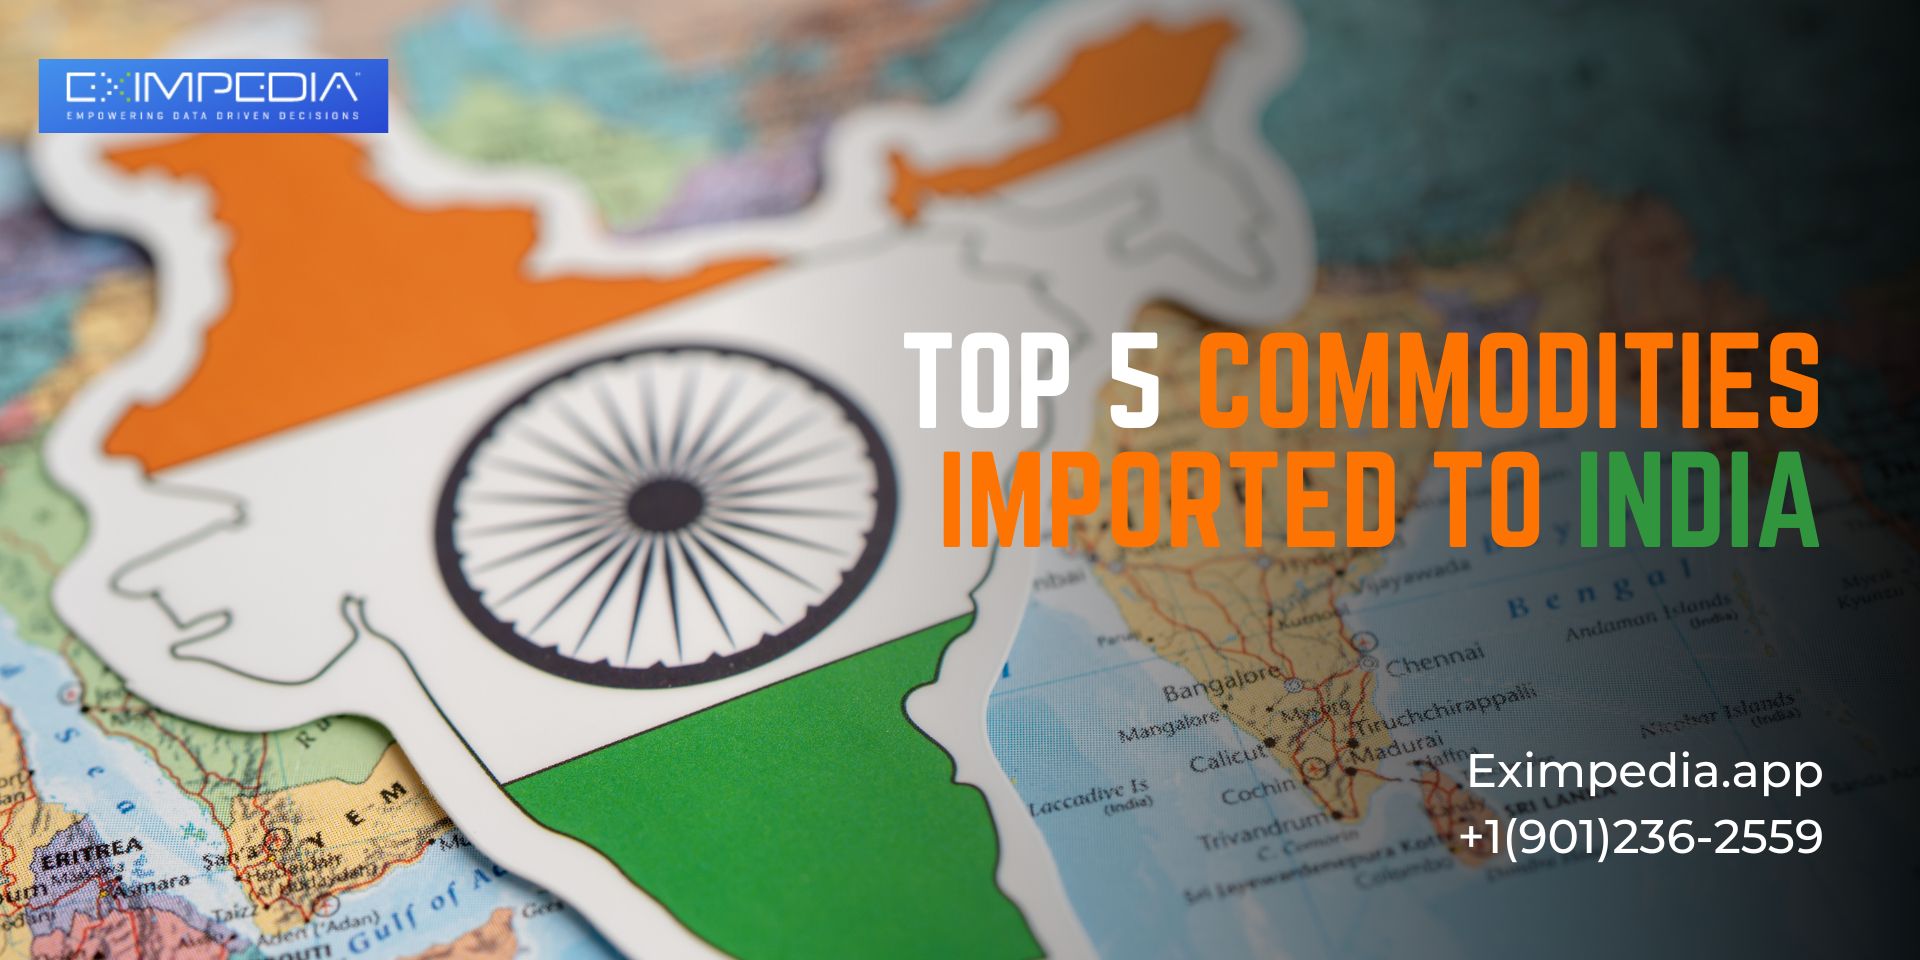 Top 5 commodities imported to India